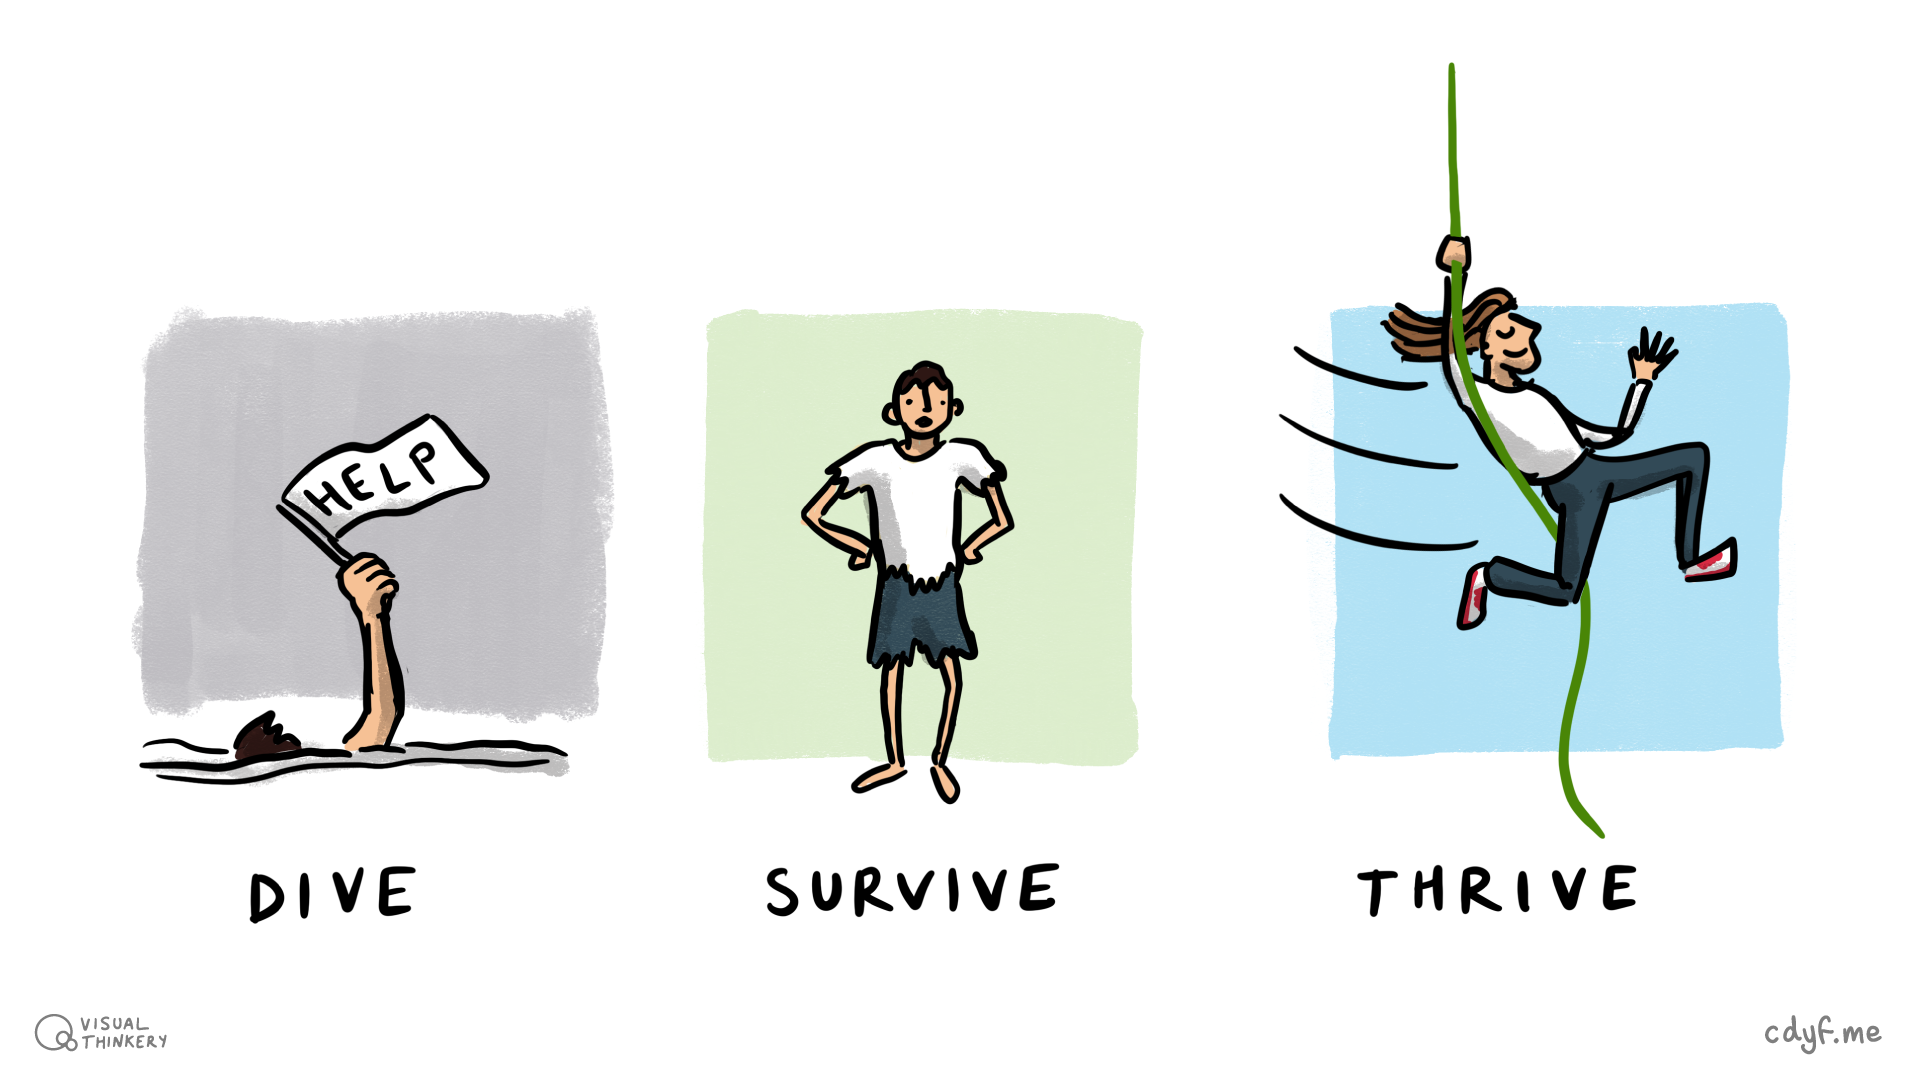 Will you dive, survive or thrive in your new working environment? The world of employment can be a bit of a jungle where you struggle for existence. What survival skills will you need to avoid diving (left) and how can you move beyond merely surviving (middle) towards positively thriving as a professional (right)? Jungle survival sketch by Visual Thinkery is licensed under CC-BY-ND